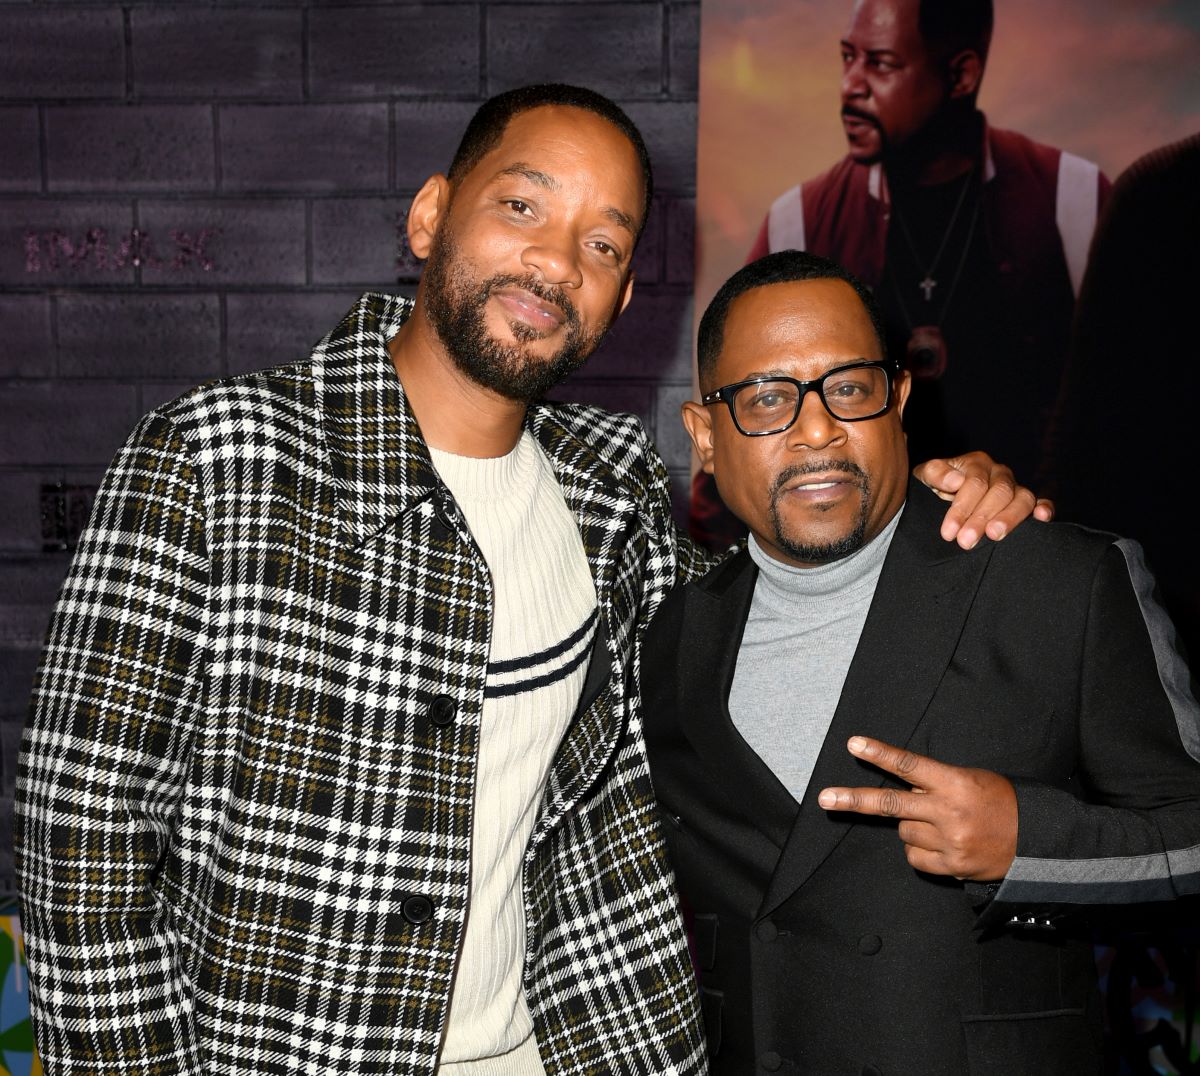 Will Smith and Martin Lawrence at the premiere of Columbia Pictures' "Bad Boys For Life"